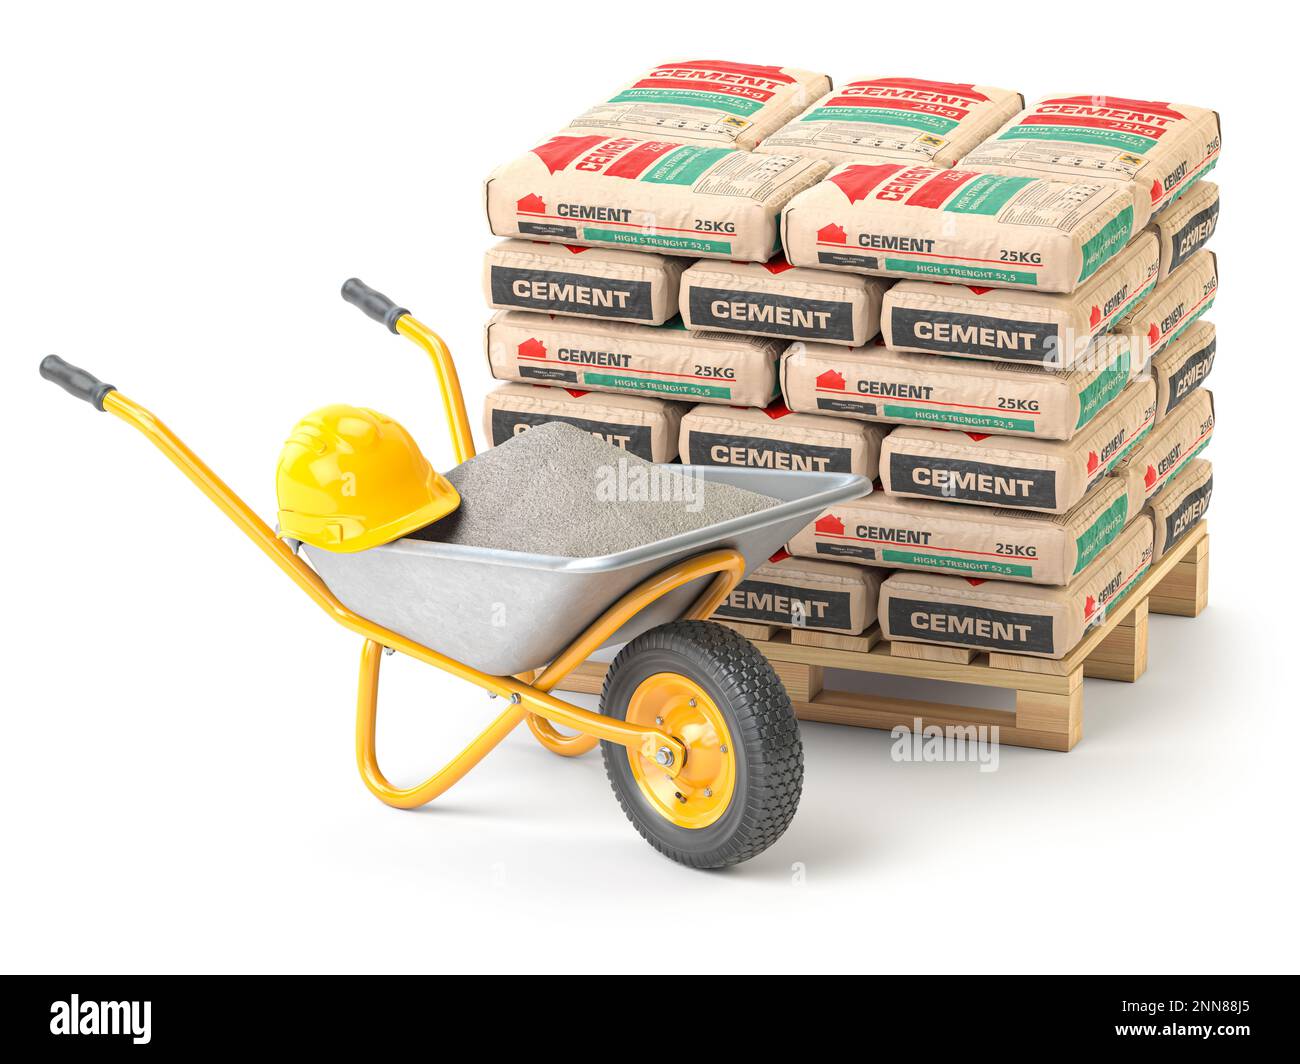 Wheelbarrow and cement bags isolated on white. Construction materials. 3d illustration Stock Photo